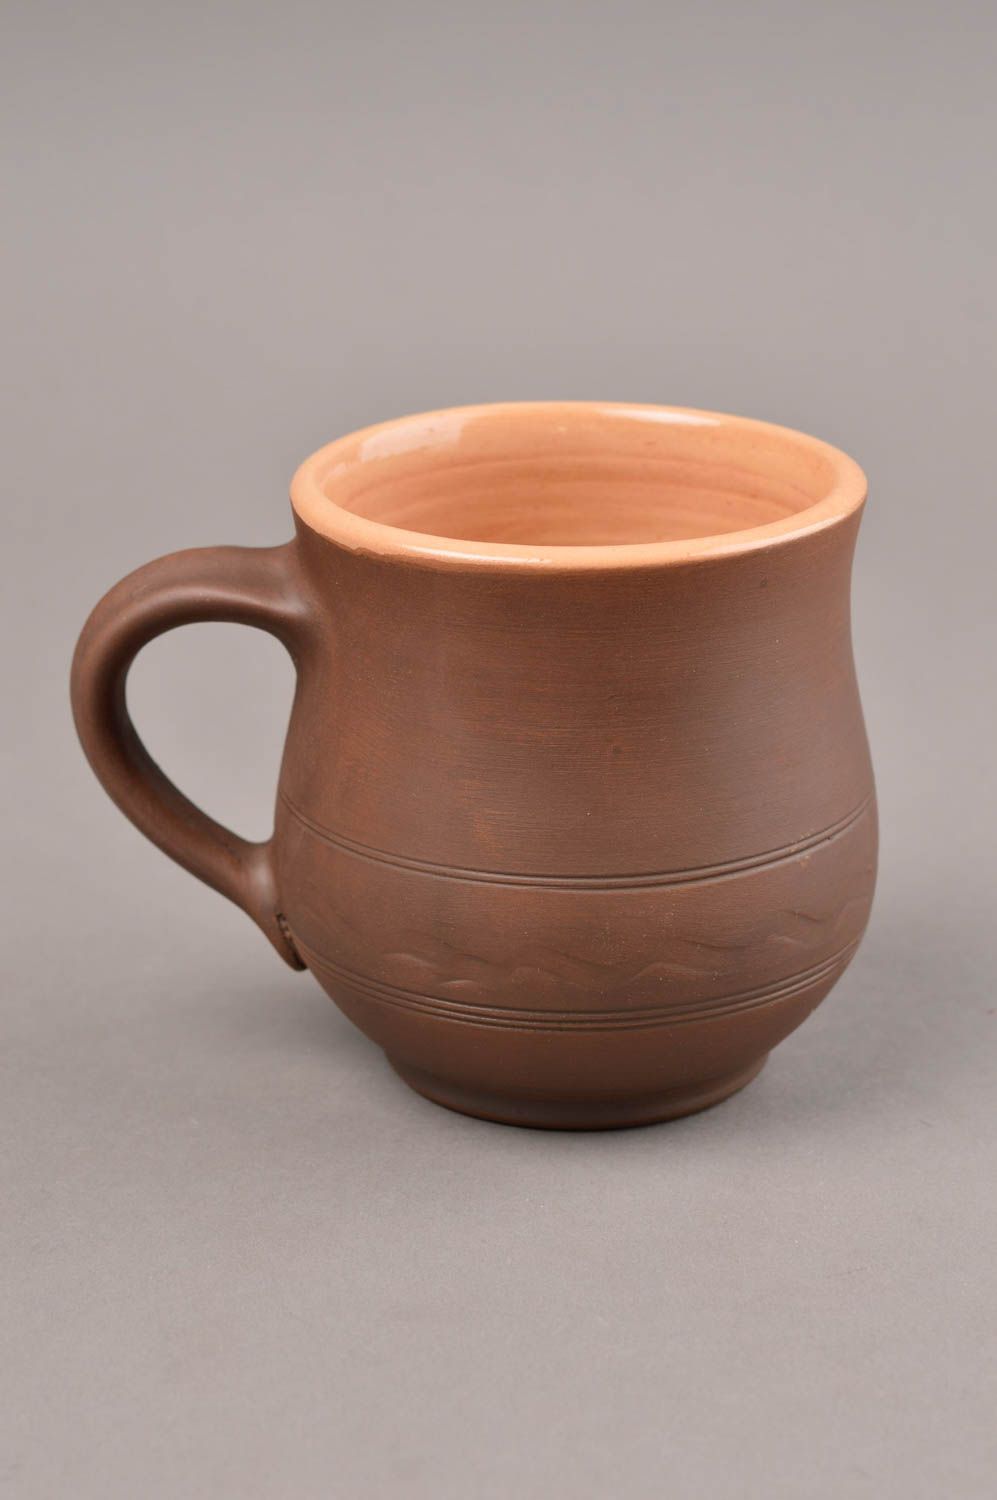 8 oz brown glazed coffee cup in pot shape with handle and classic rustic pattern photo 7